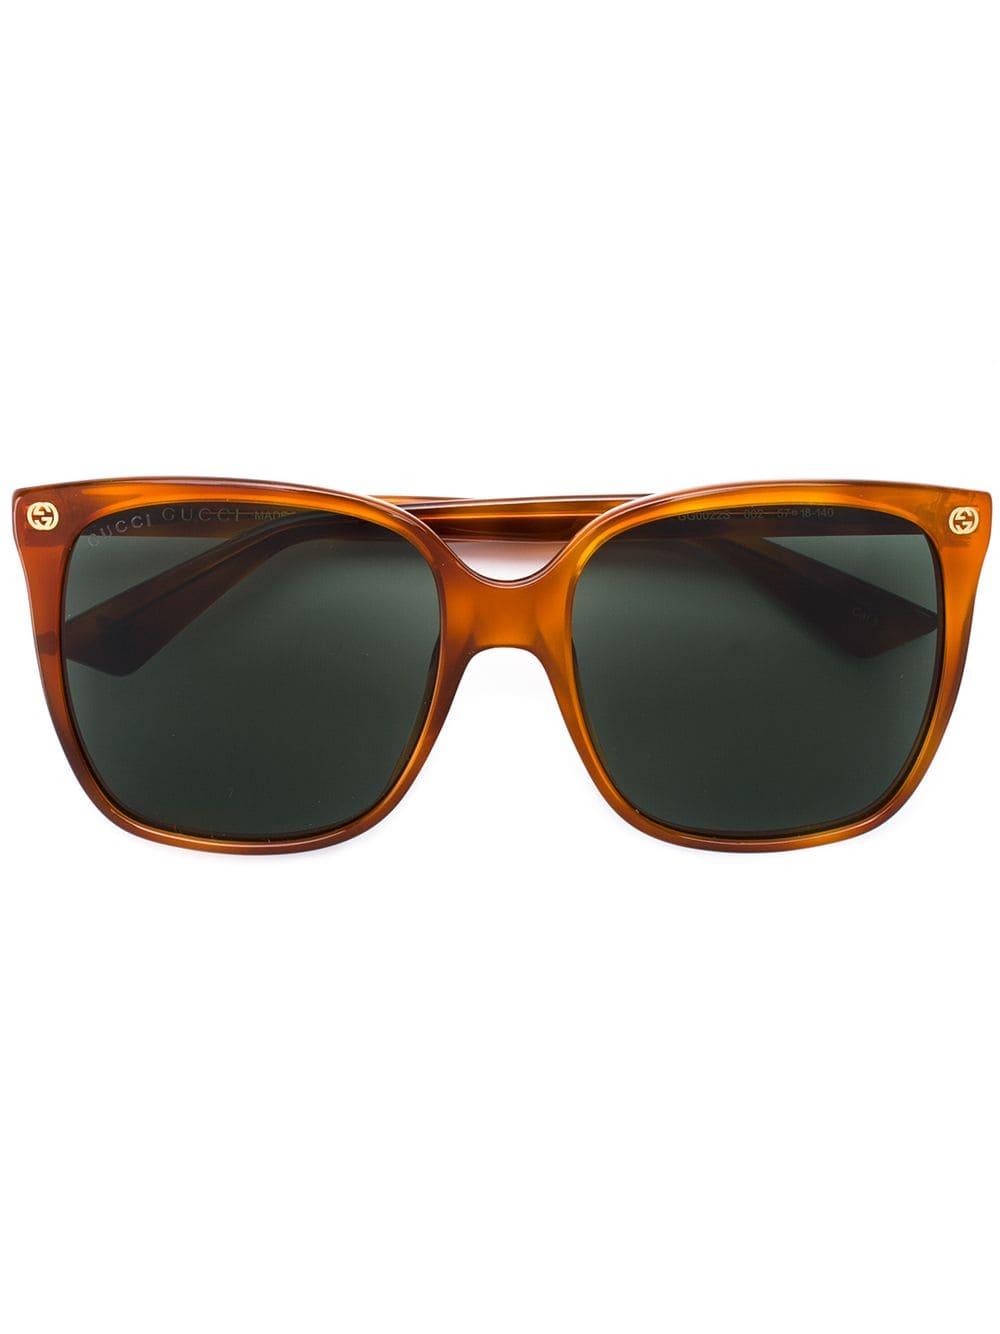 Gucci Oversized Square Sunglasses in Yellow - Lyst